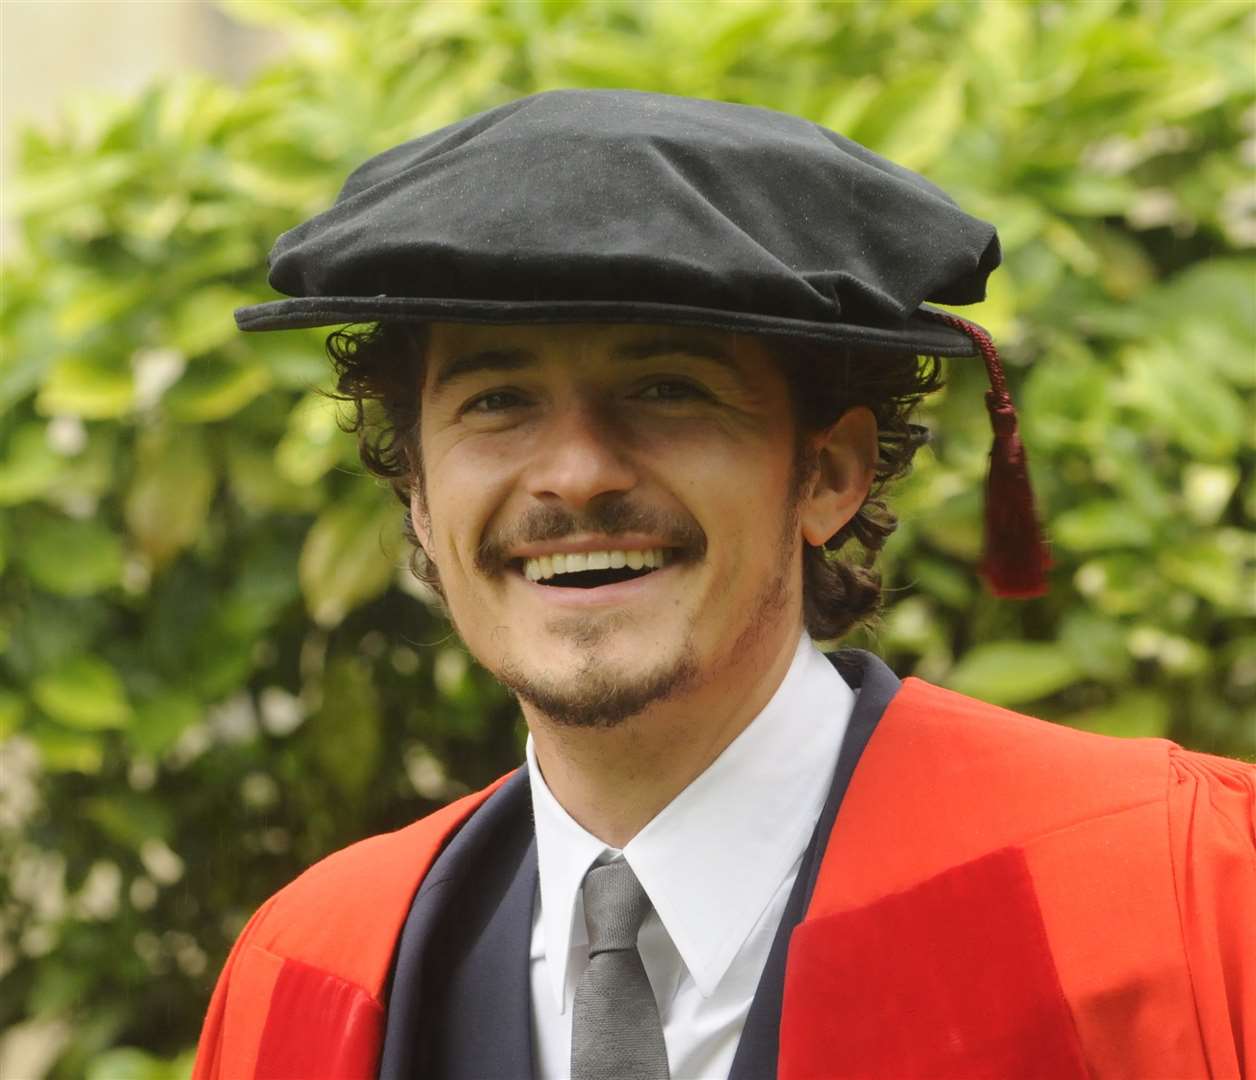 Orlando received an honorary degree at Canterbury Cathedral in 2010